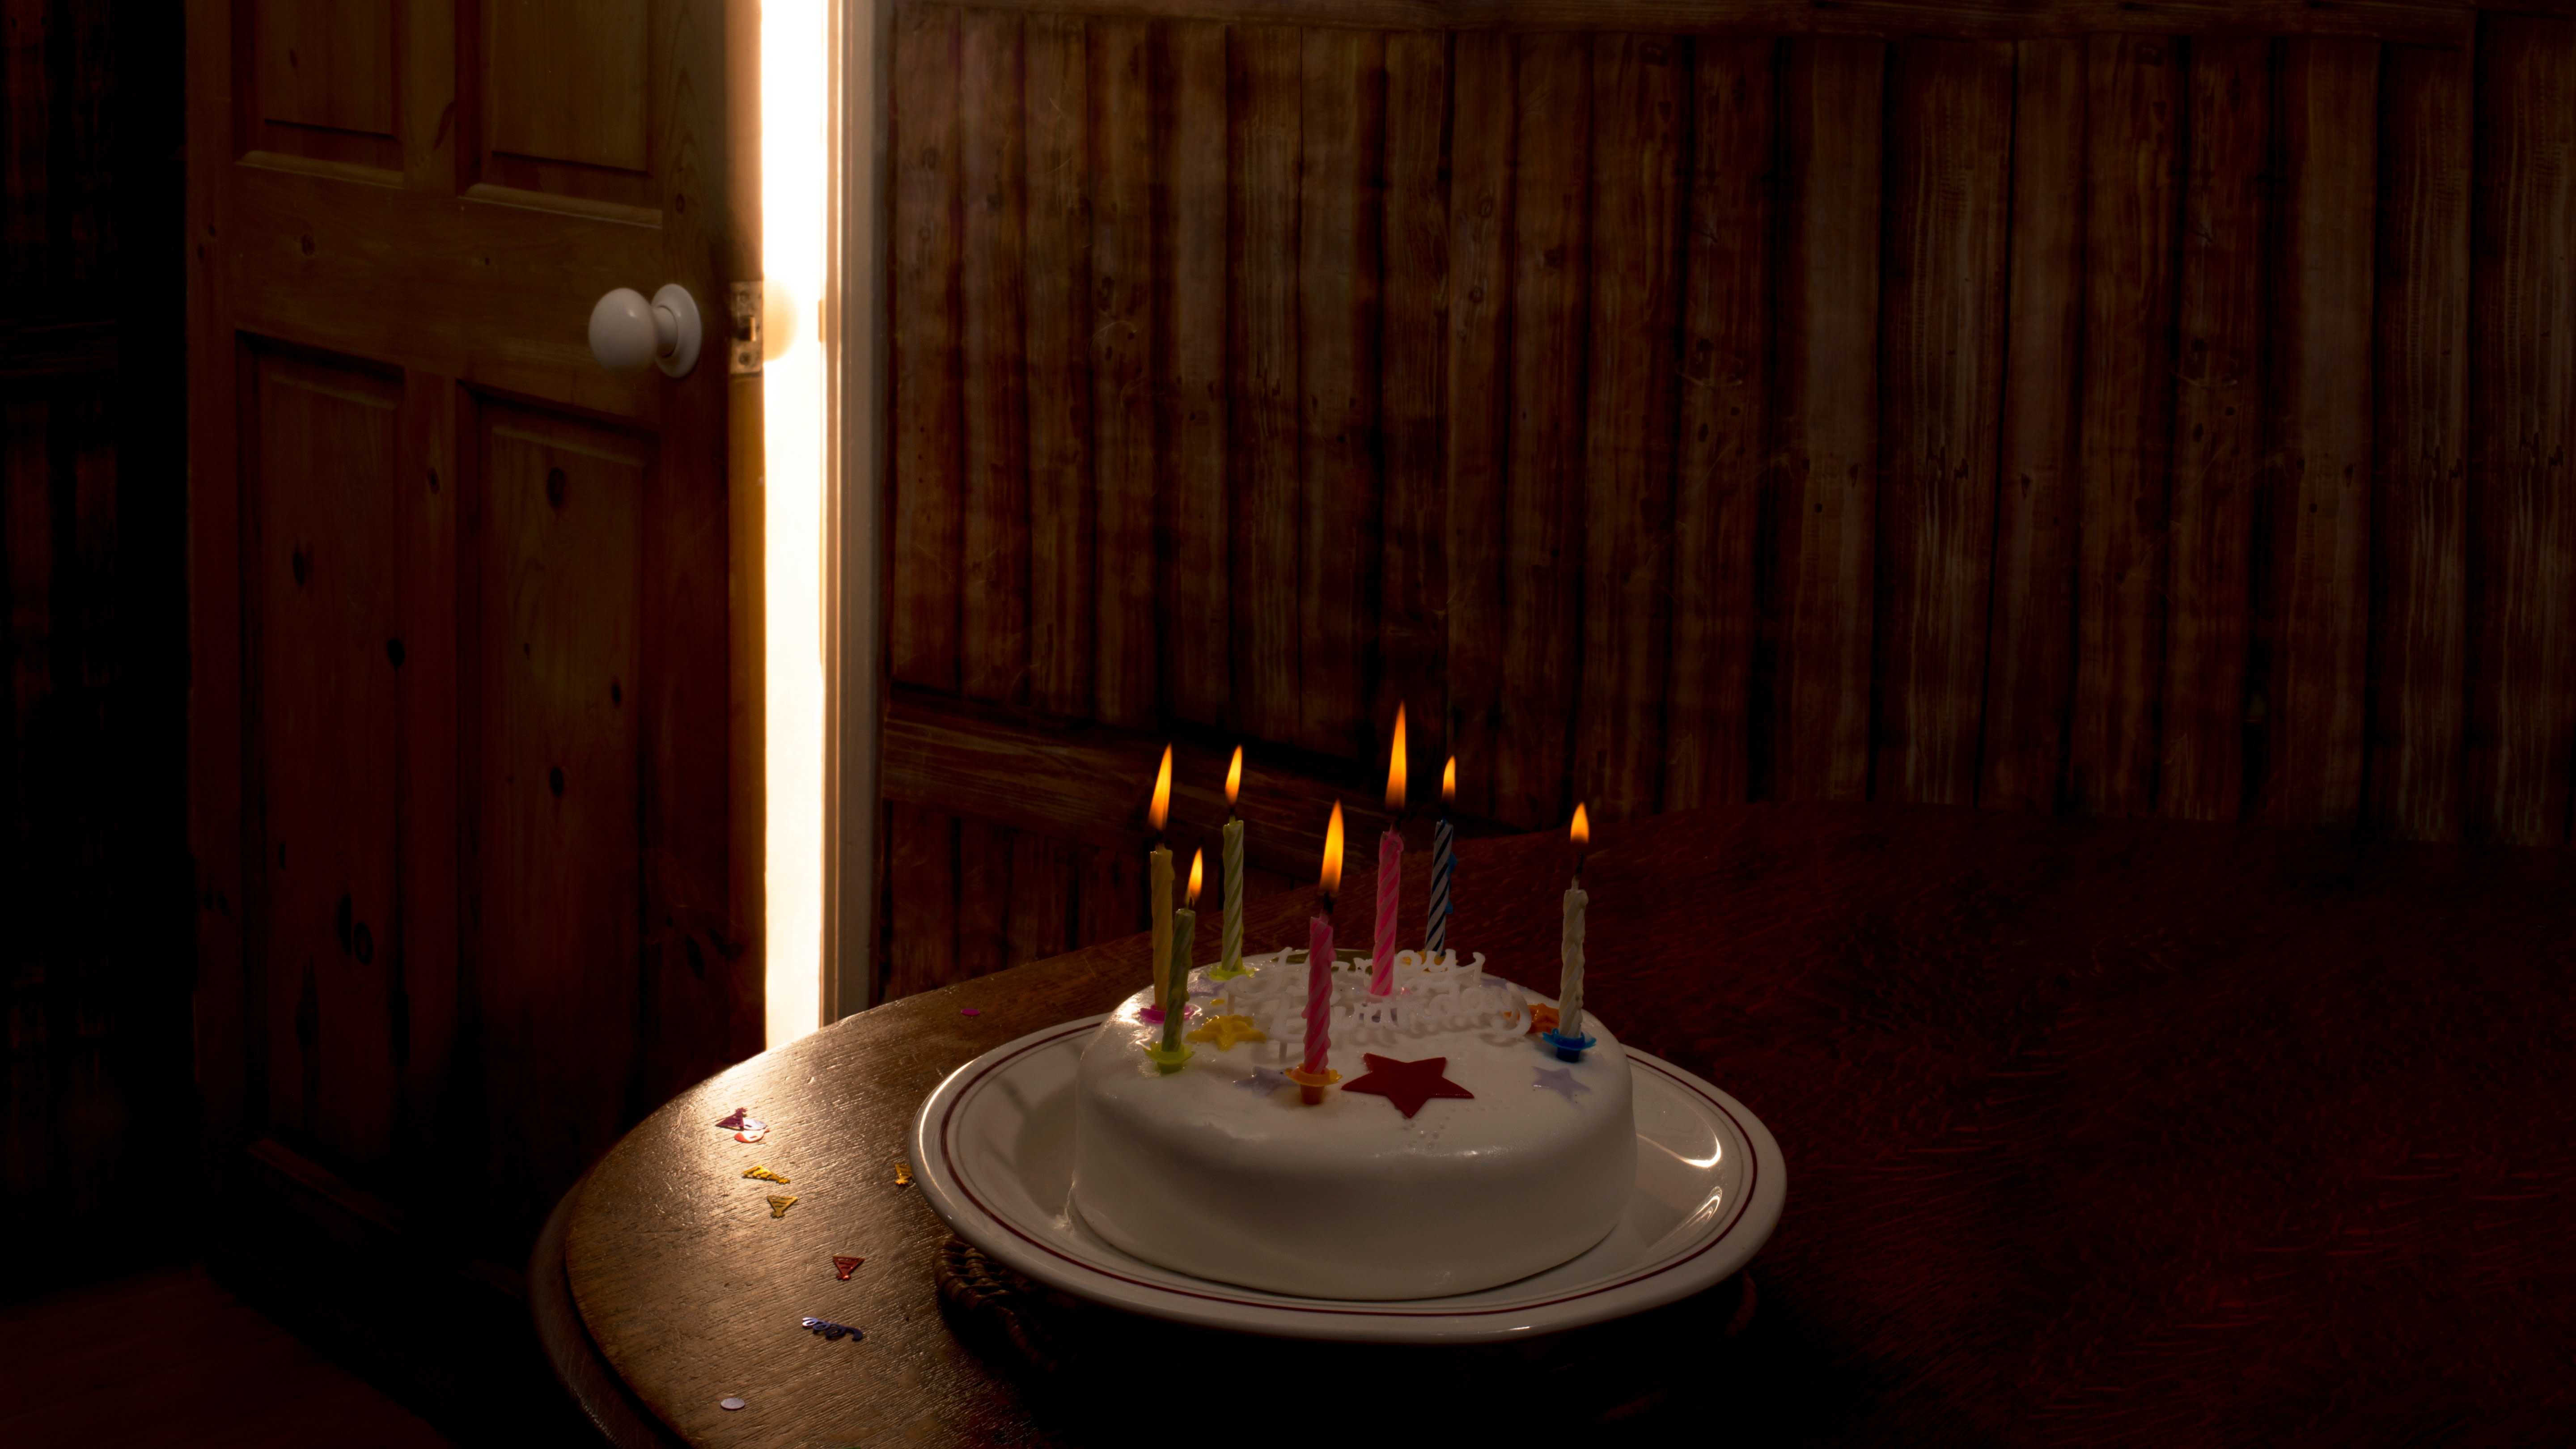 A birthday cake with seven lighted, coloured candles on a wooden table